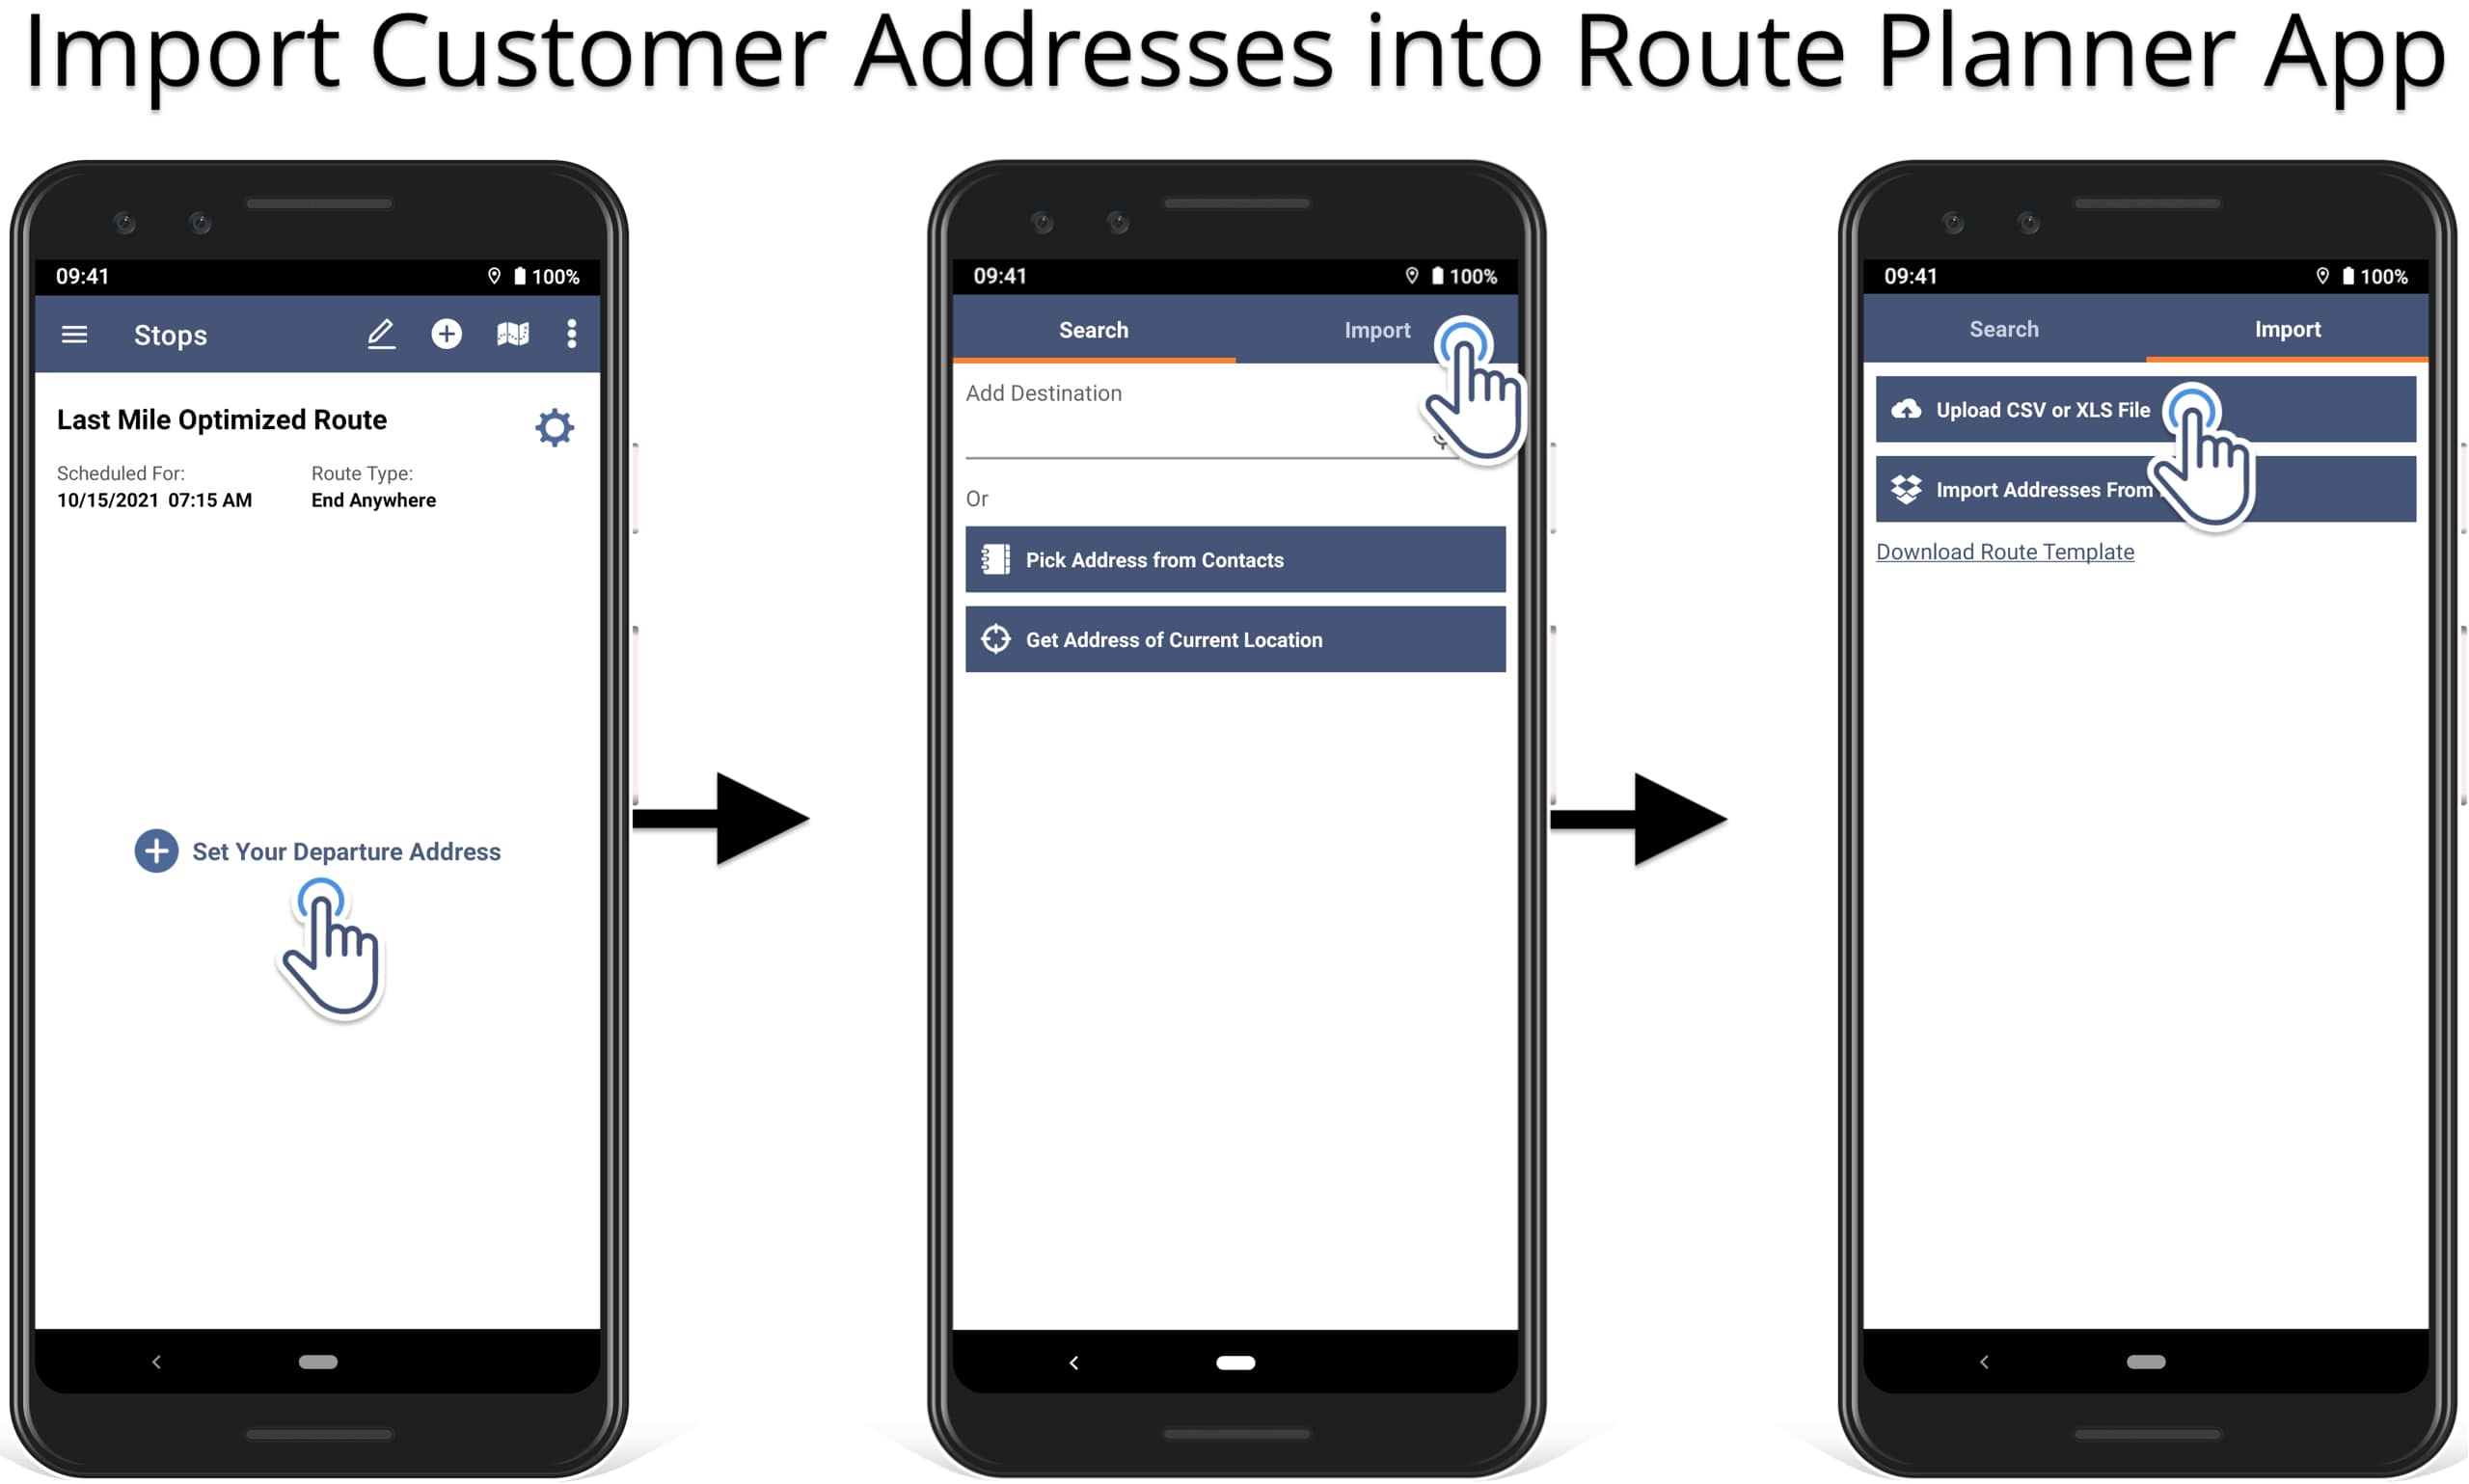 Upload route spreadsheet into the route planner app to map multiple locations for delivery.